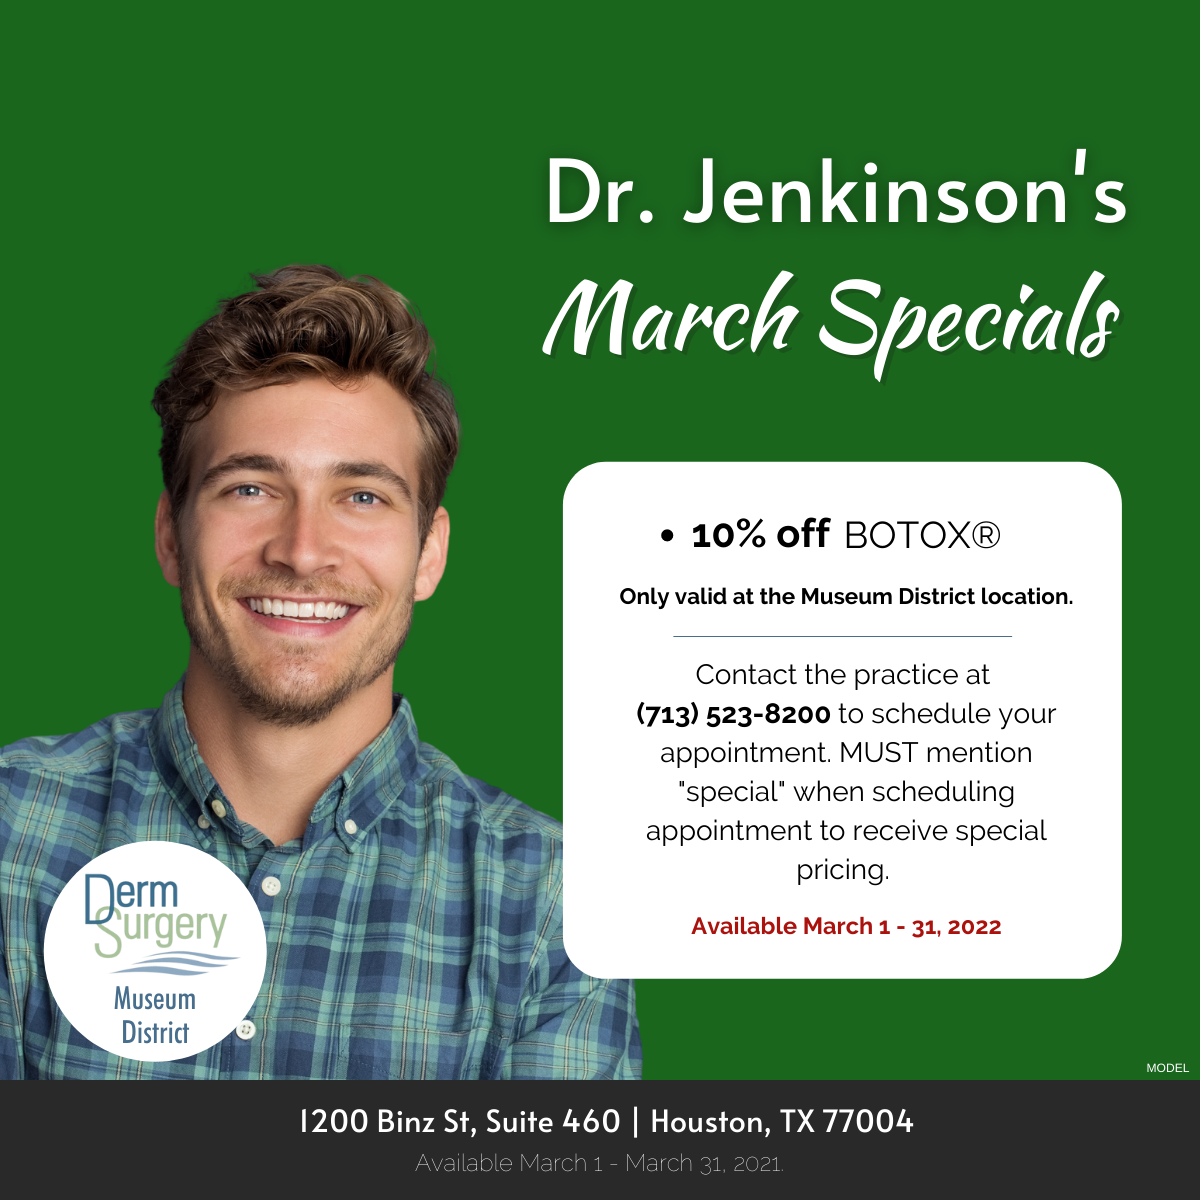 Dr. Jenkinson's March Specials